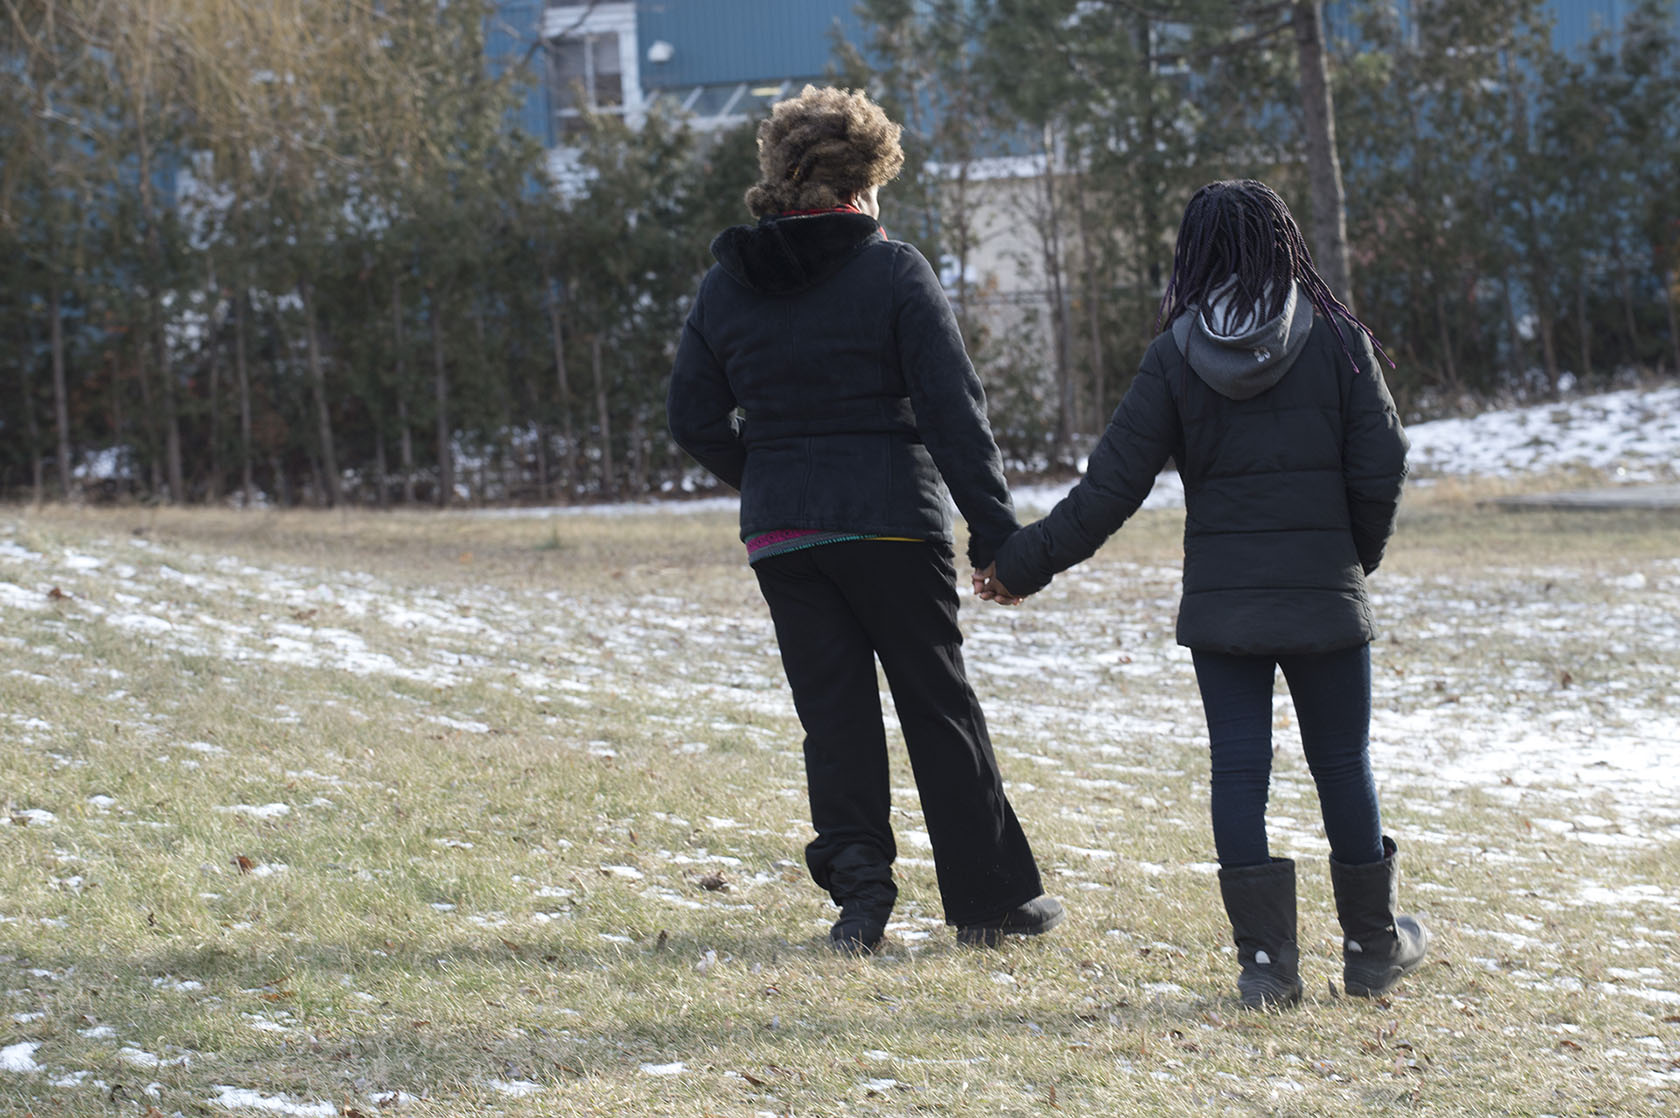 Photo of anonymous mother and daughter (“Jane and Kobina”) holding hands in outdoor setting, with backs to the camera.
